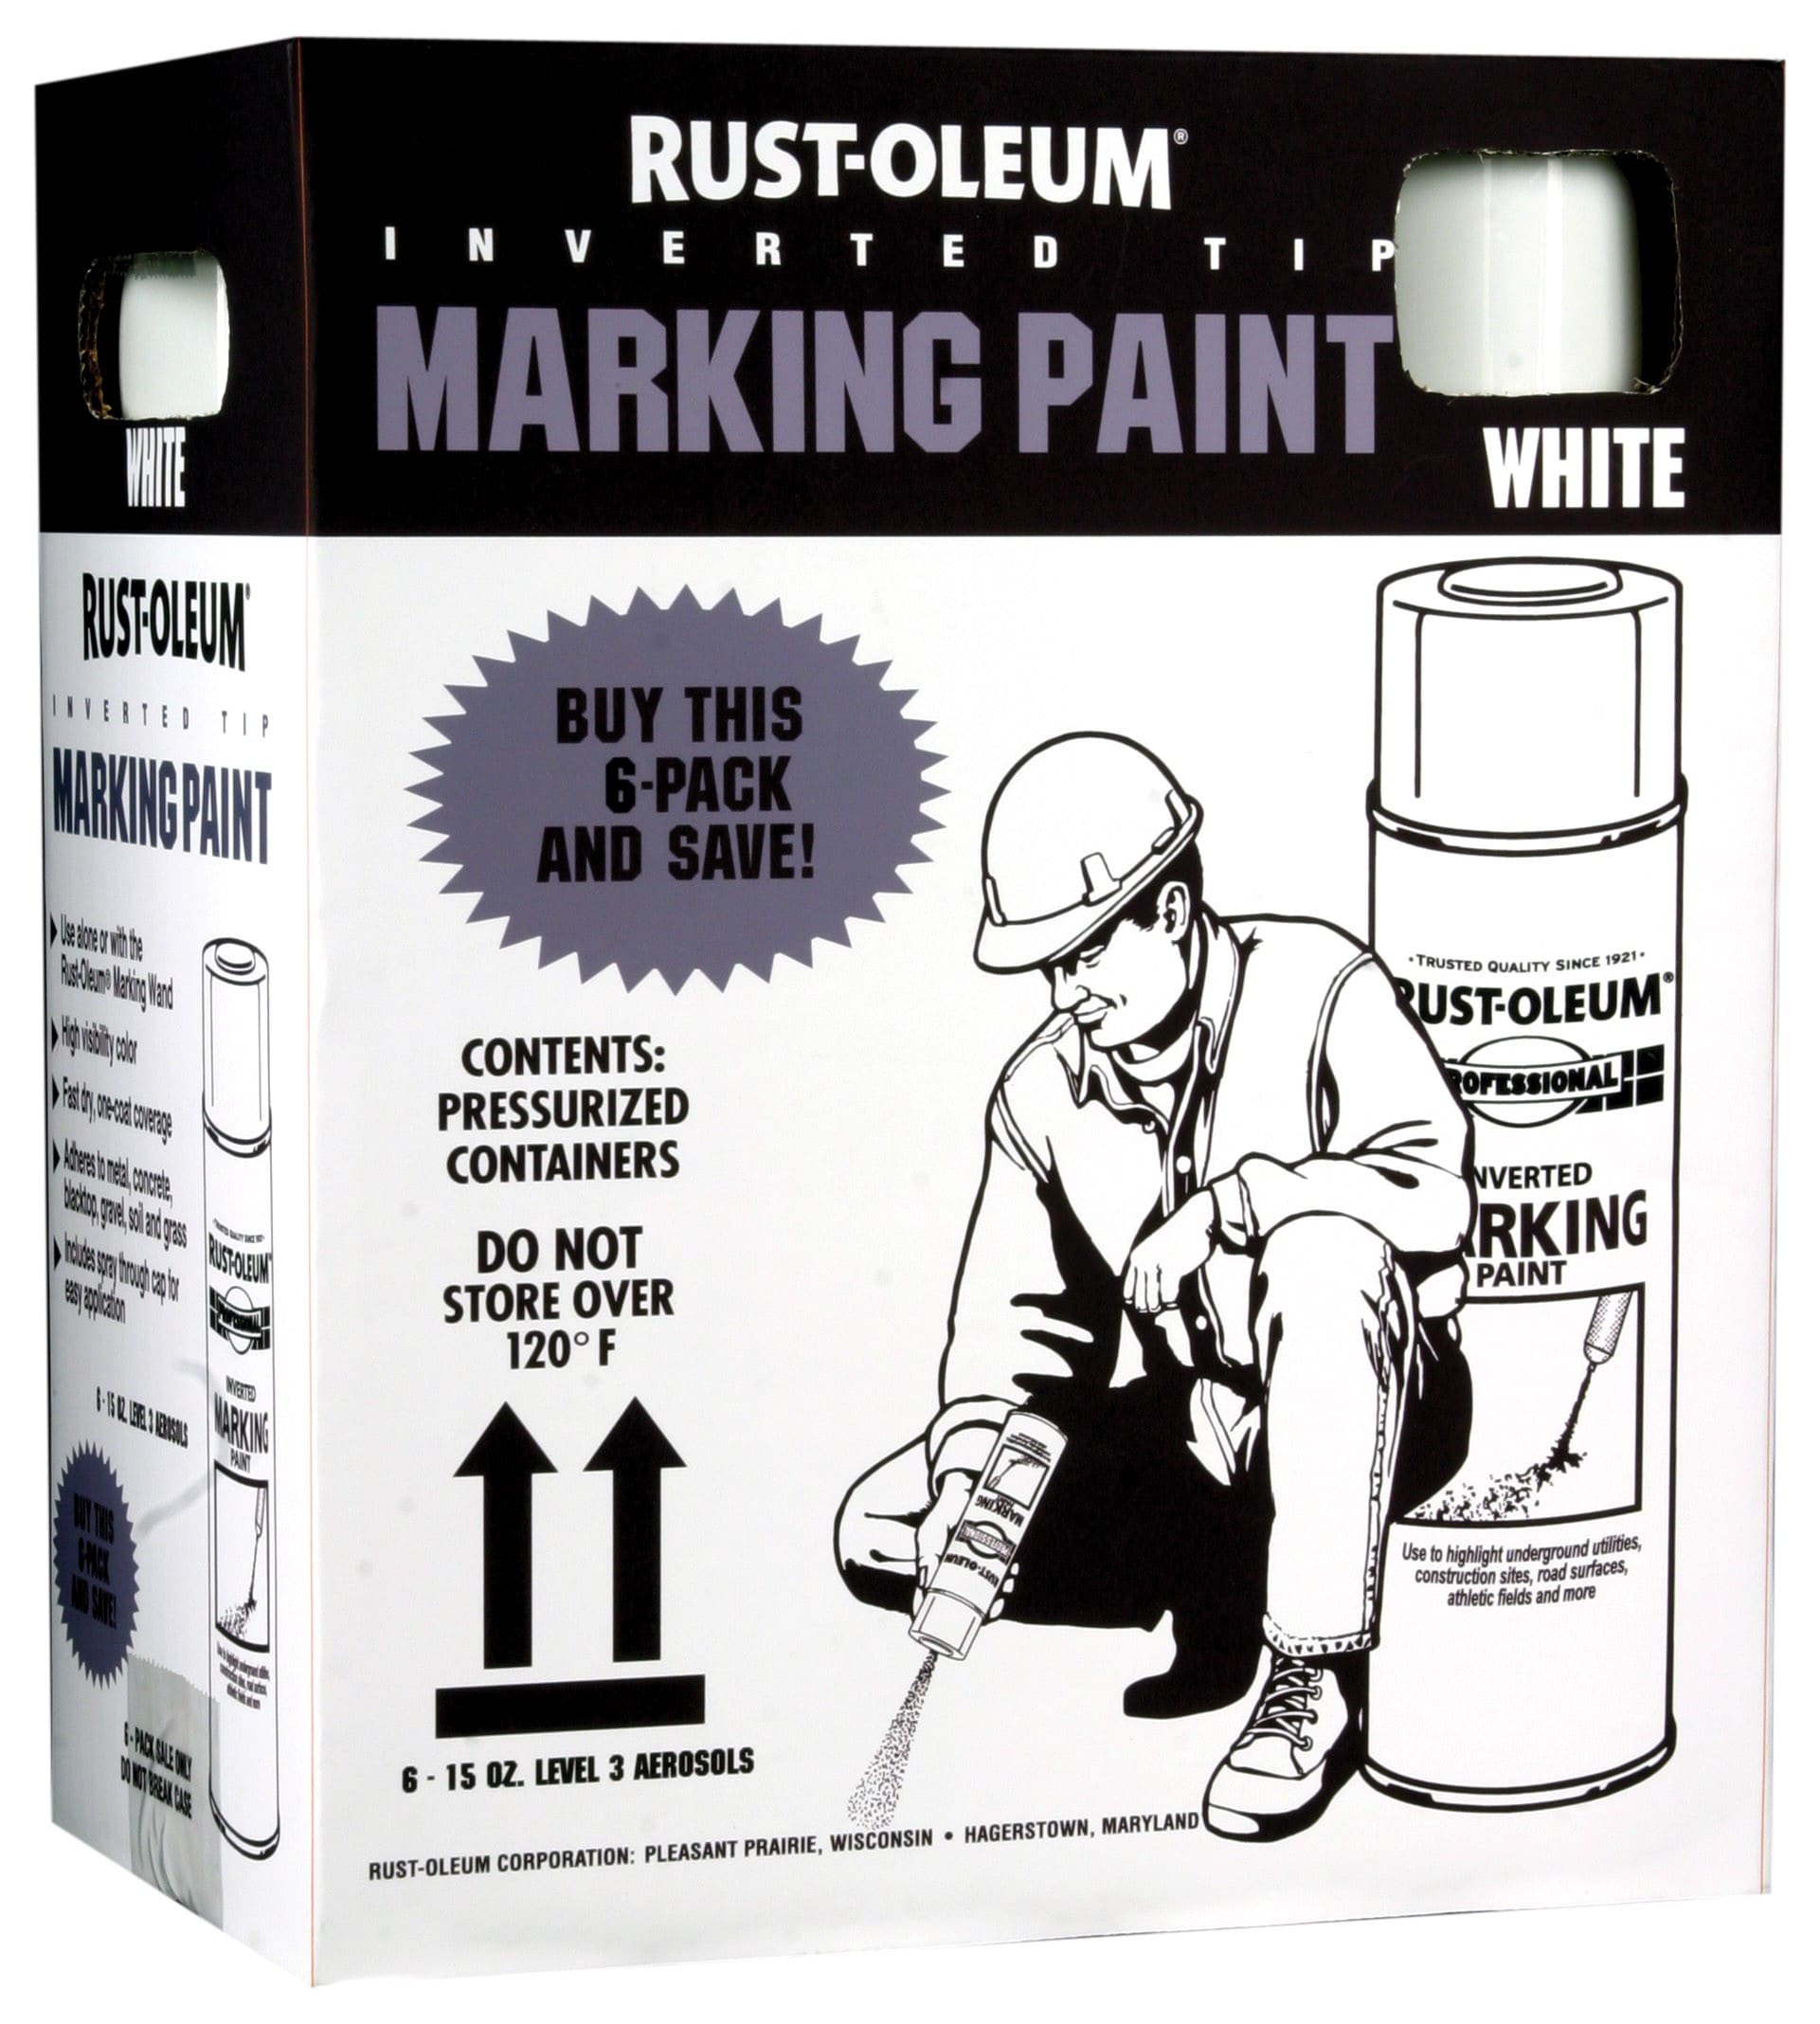 Rust-Oleum 266593 Professional 2x Distance White Marking Spray Paint 15-Ounce